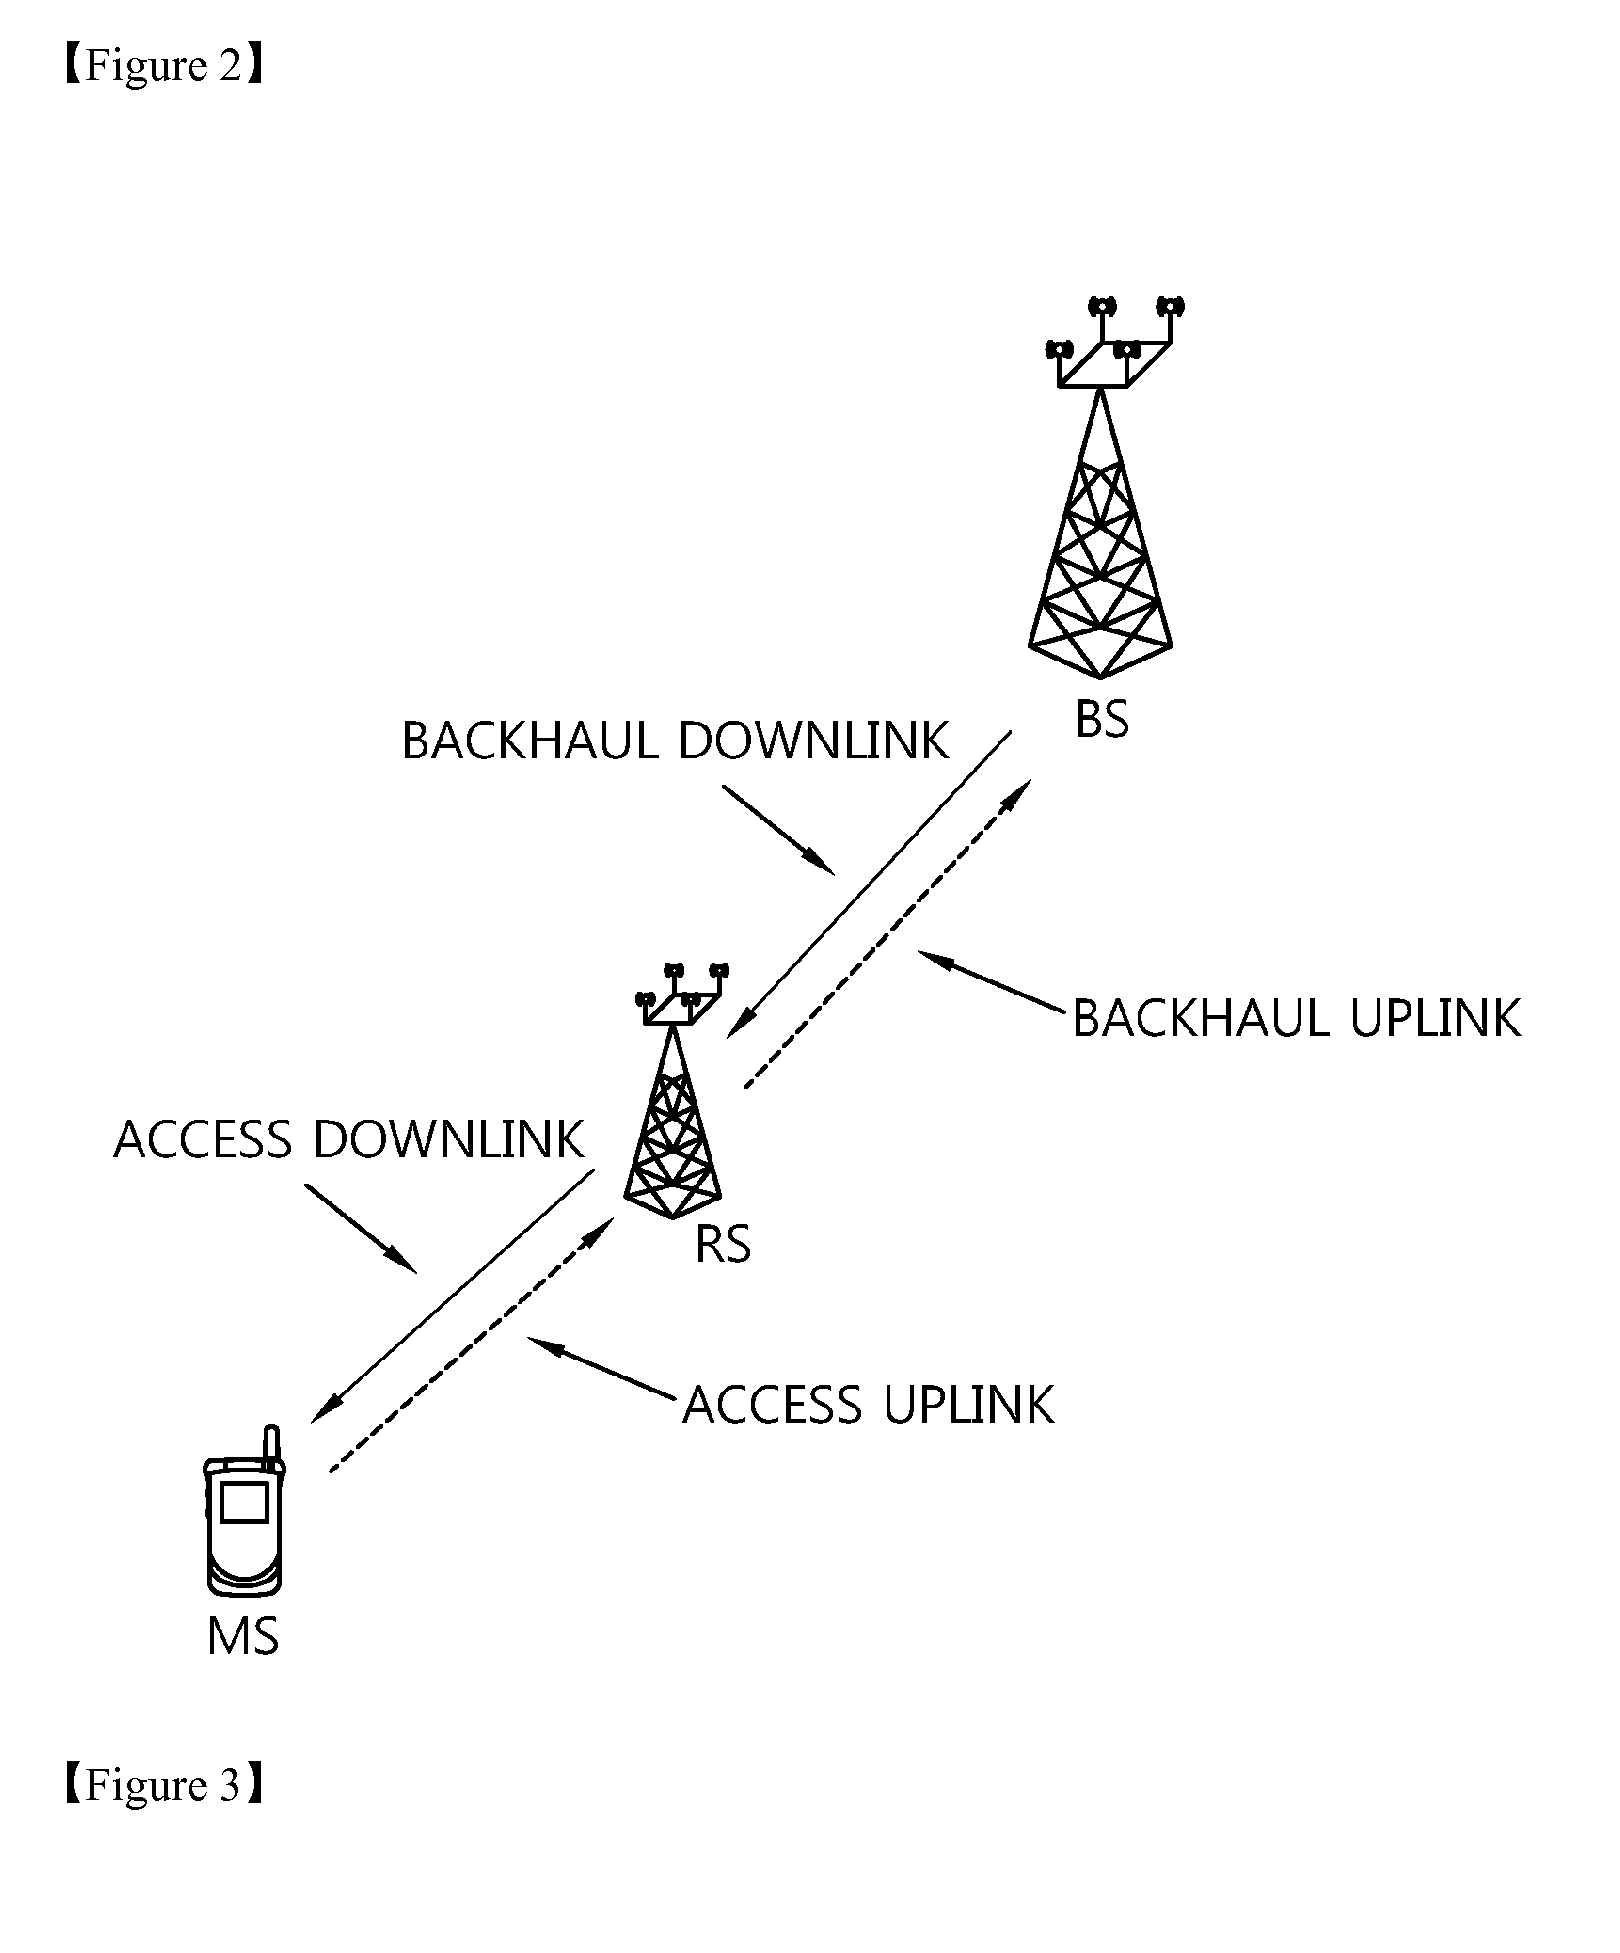 Resource allocation method for backhaul link and access link in a wireless communication system including relay